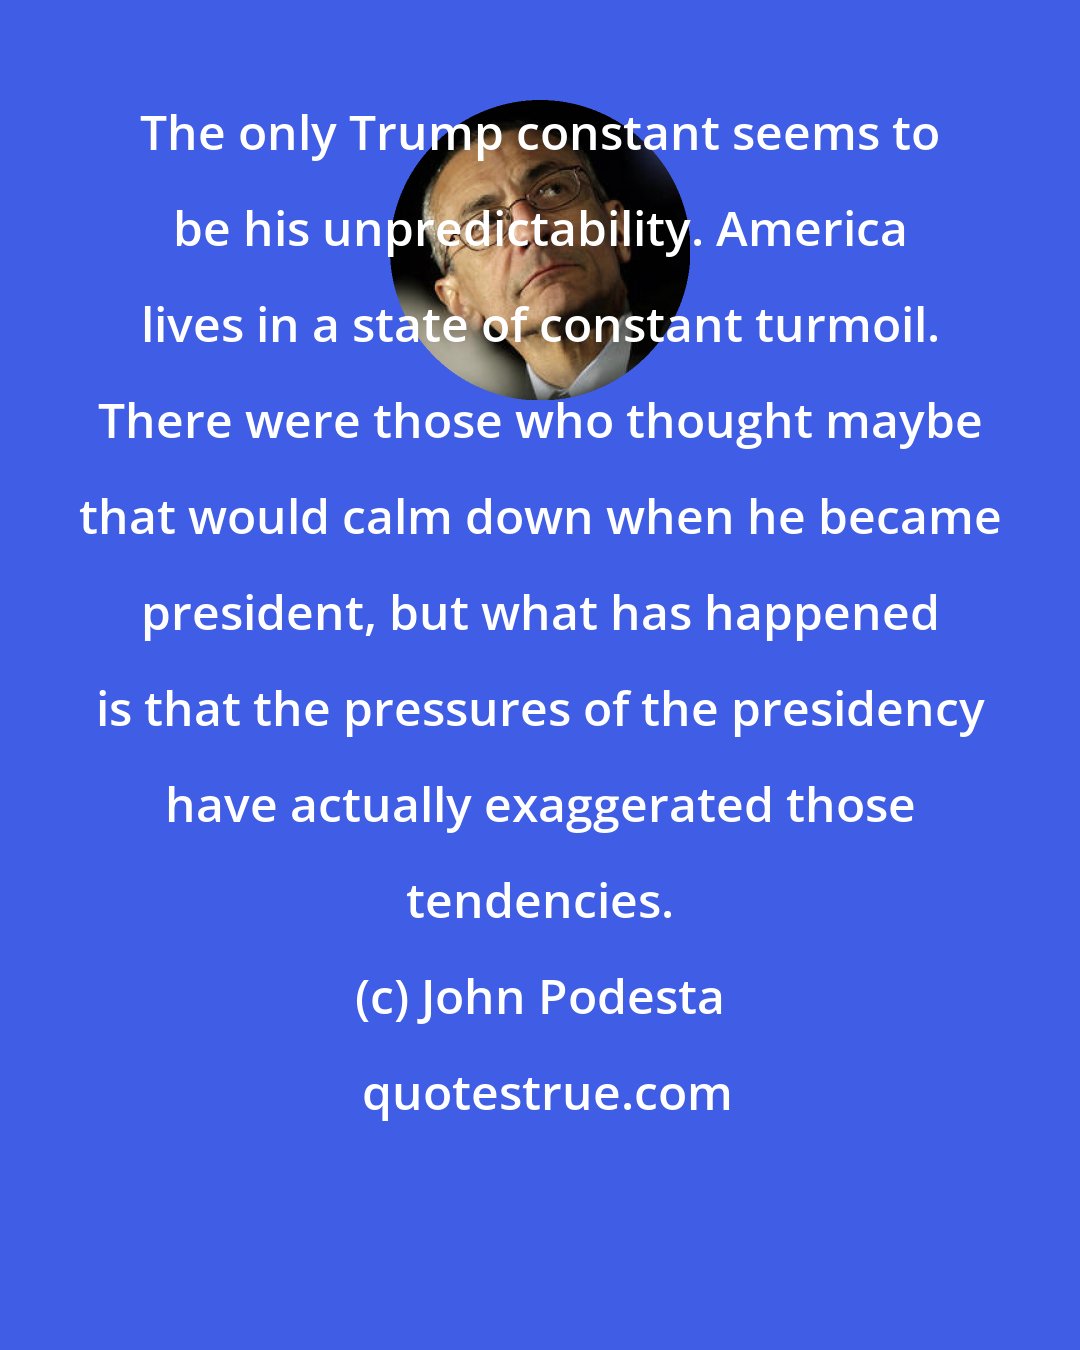 John Podesta: The only Trump constant seems to be his unpredictability. America lives in a state of constant turmoil. There were those who thought maybe that would calm down when he became president, but what has happened is that the pressures of the presidency have actually exaggerated those tendencies.